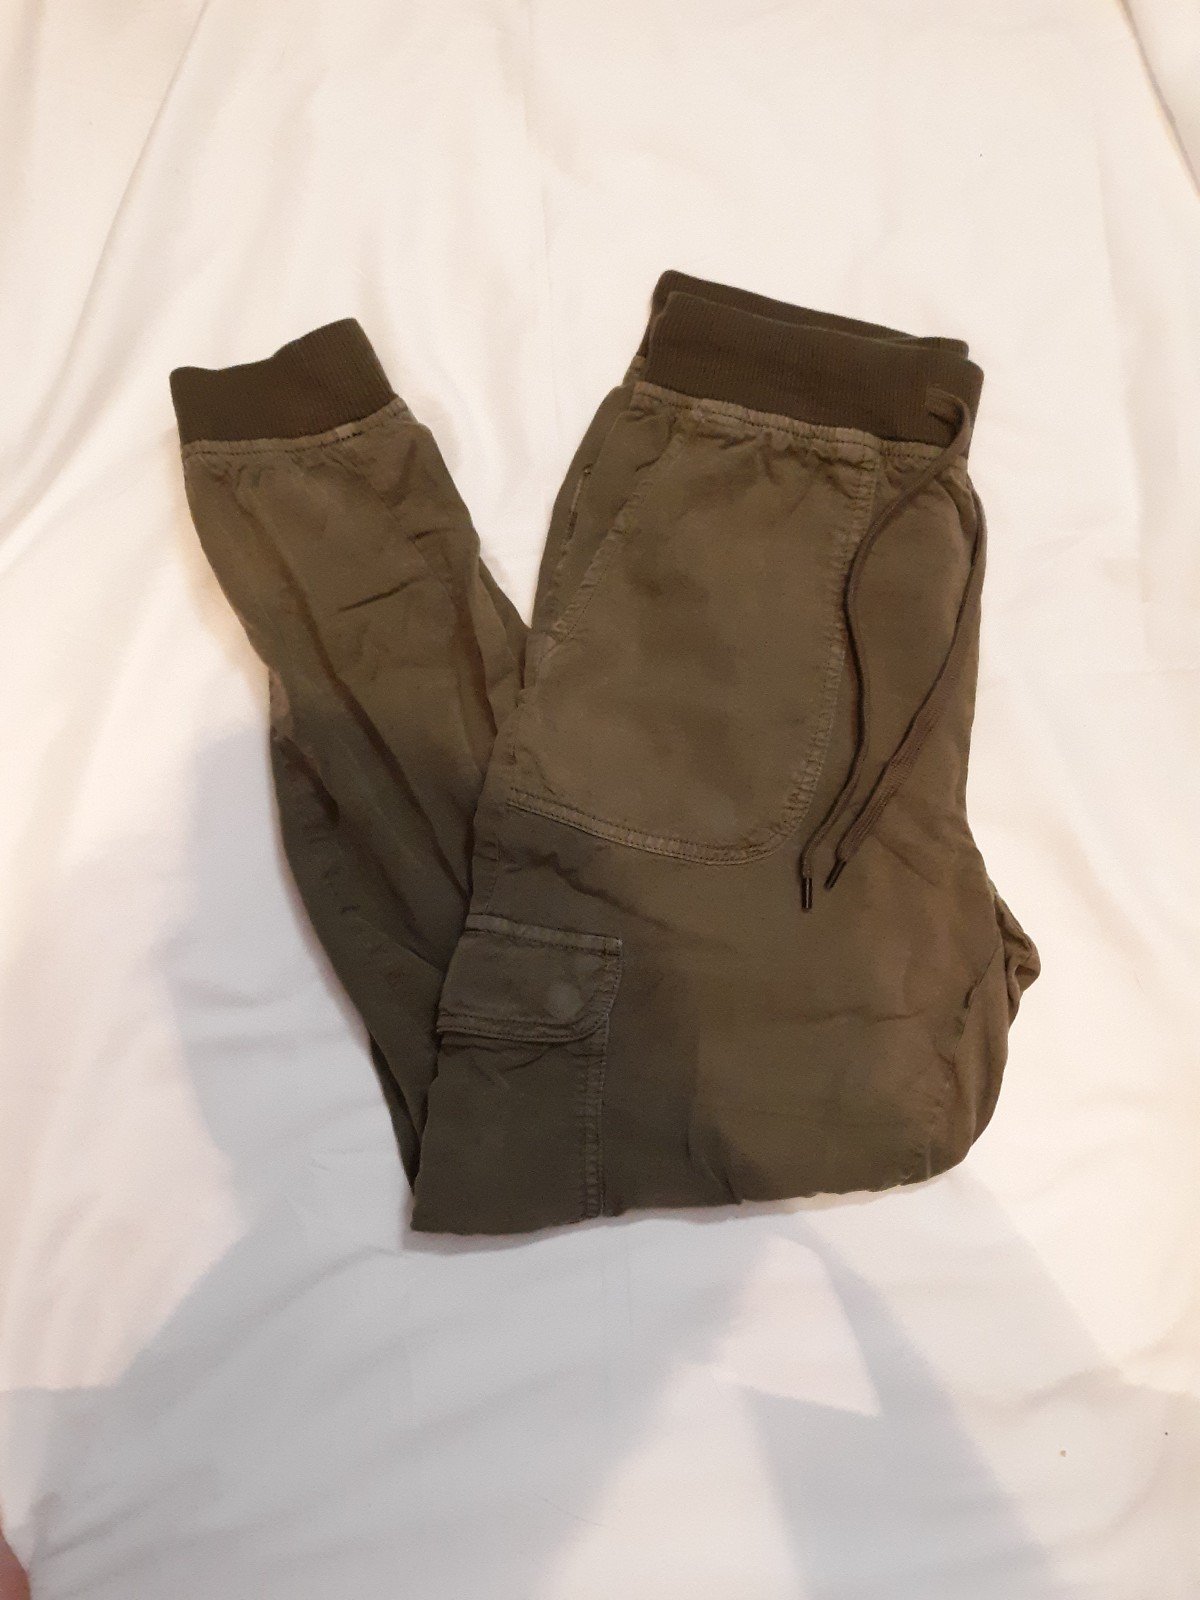 Comfortable American Eagle olive green pants KN2eb8o2a Online Exclusive